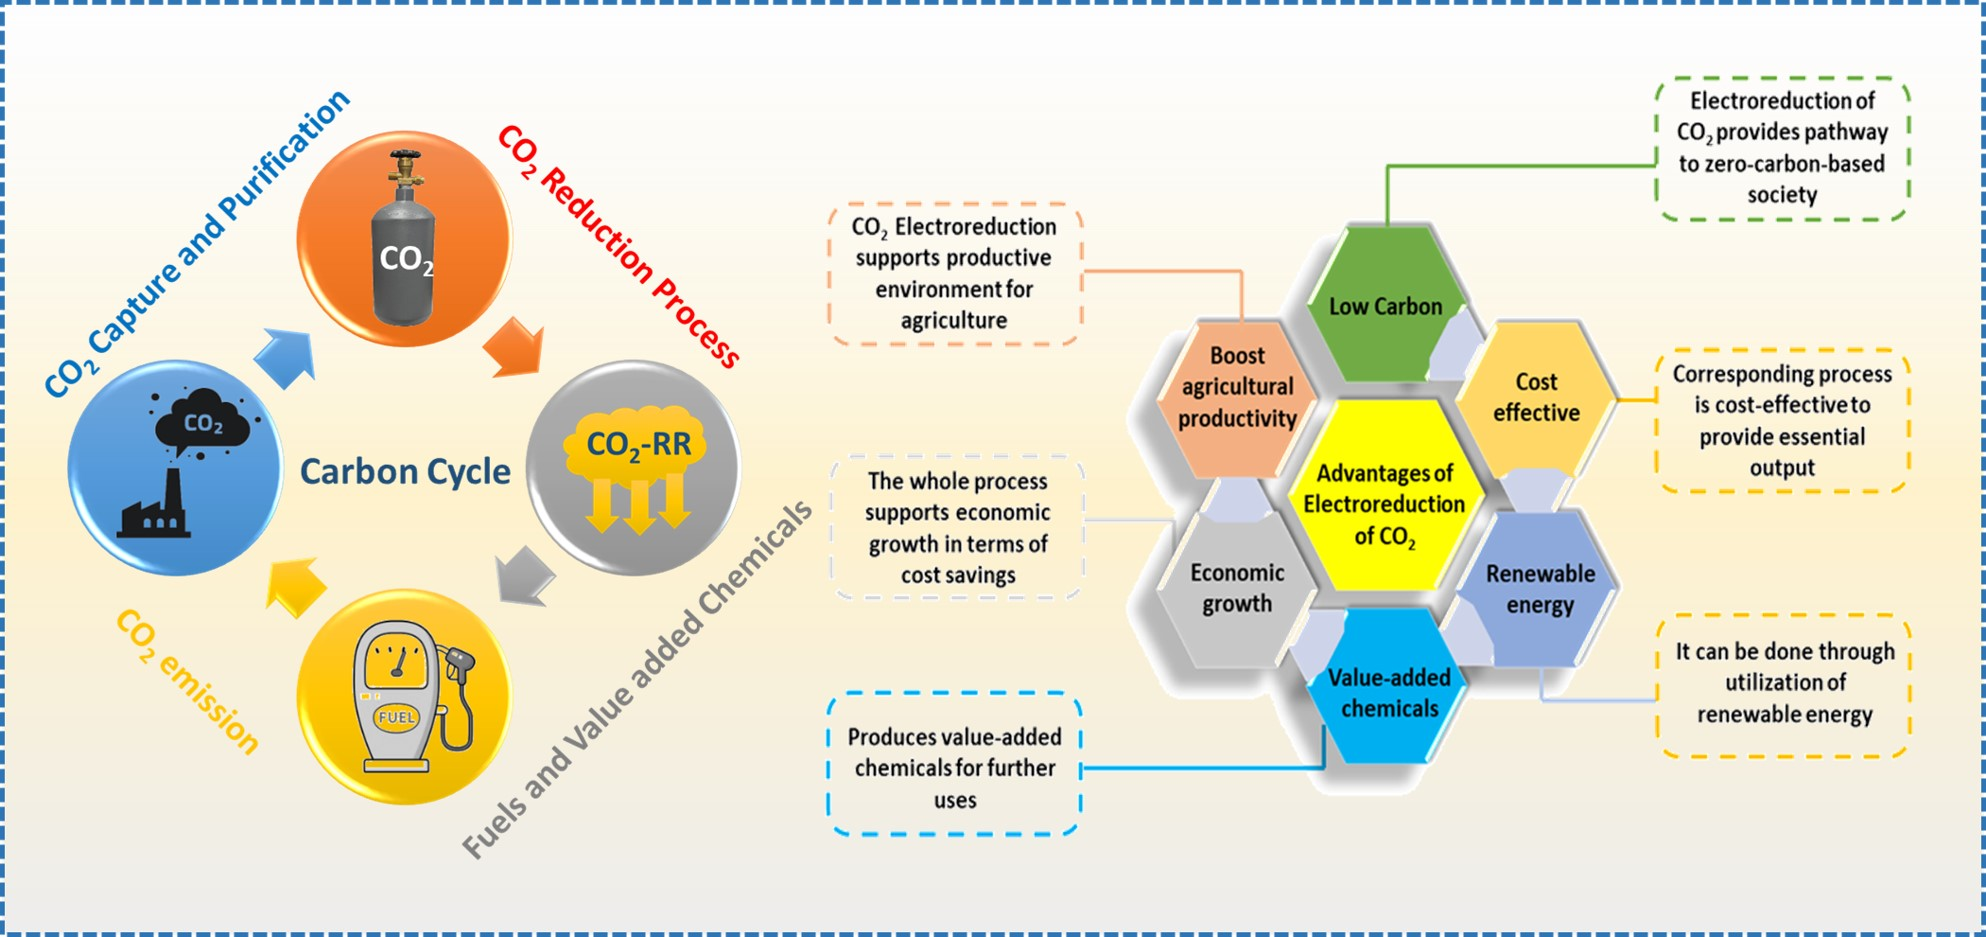 Fully-exposed Pt-Fe cluster for efficient preferential oxidation of CO  towards hydrogen purification